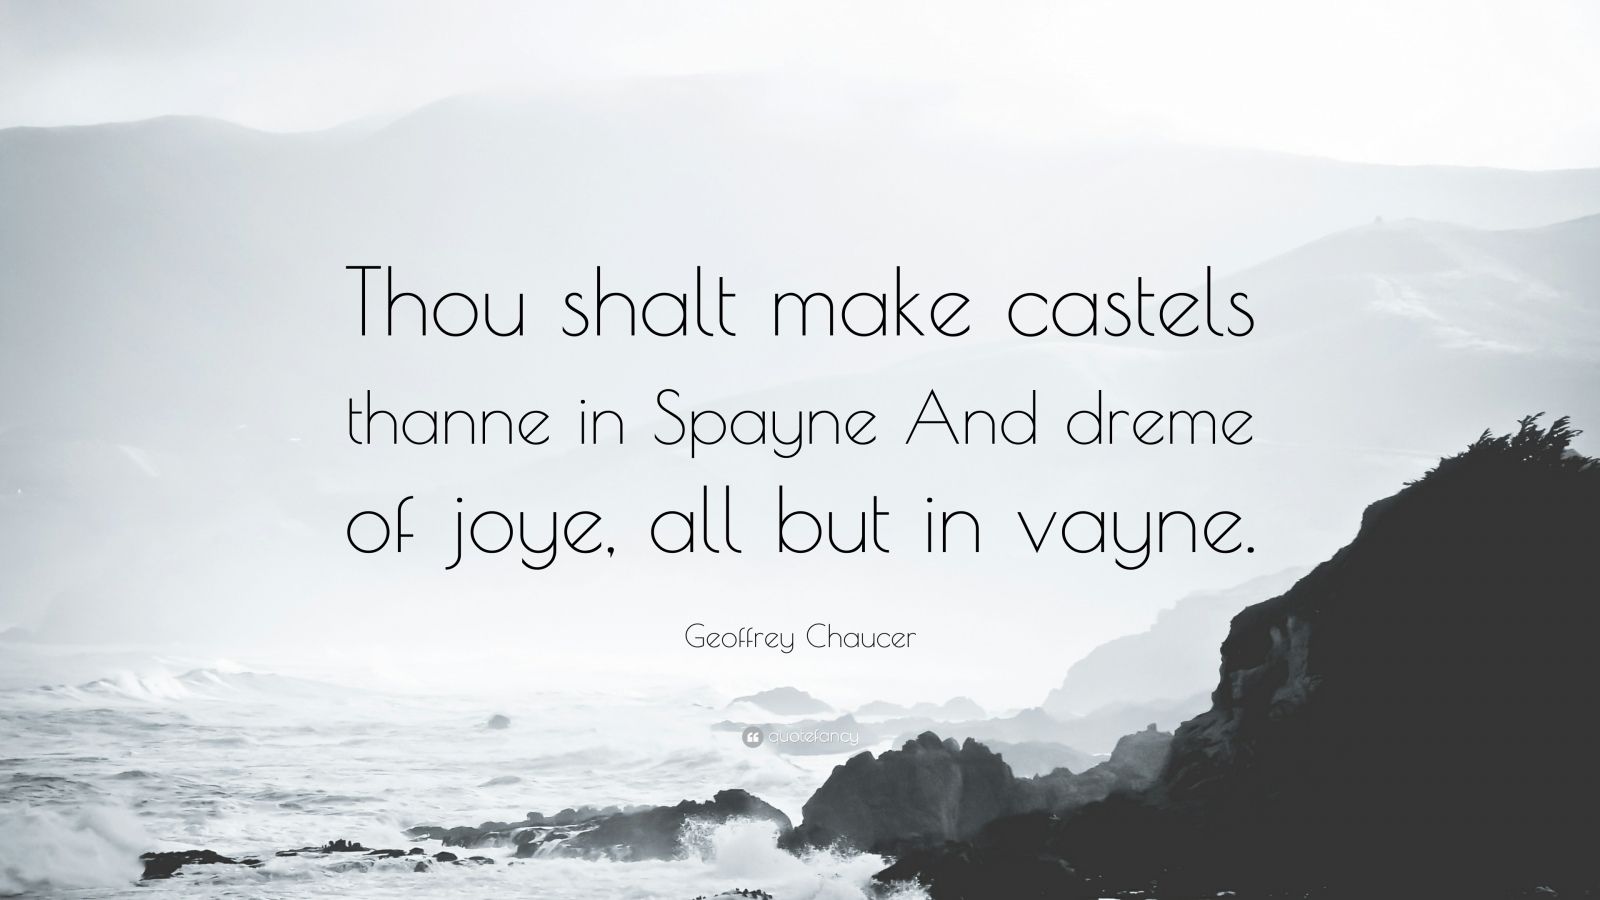 Geoffrey Chaucer Quote: “Thou shalt make castels thanne in Spayne And dreme  of joye, all but